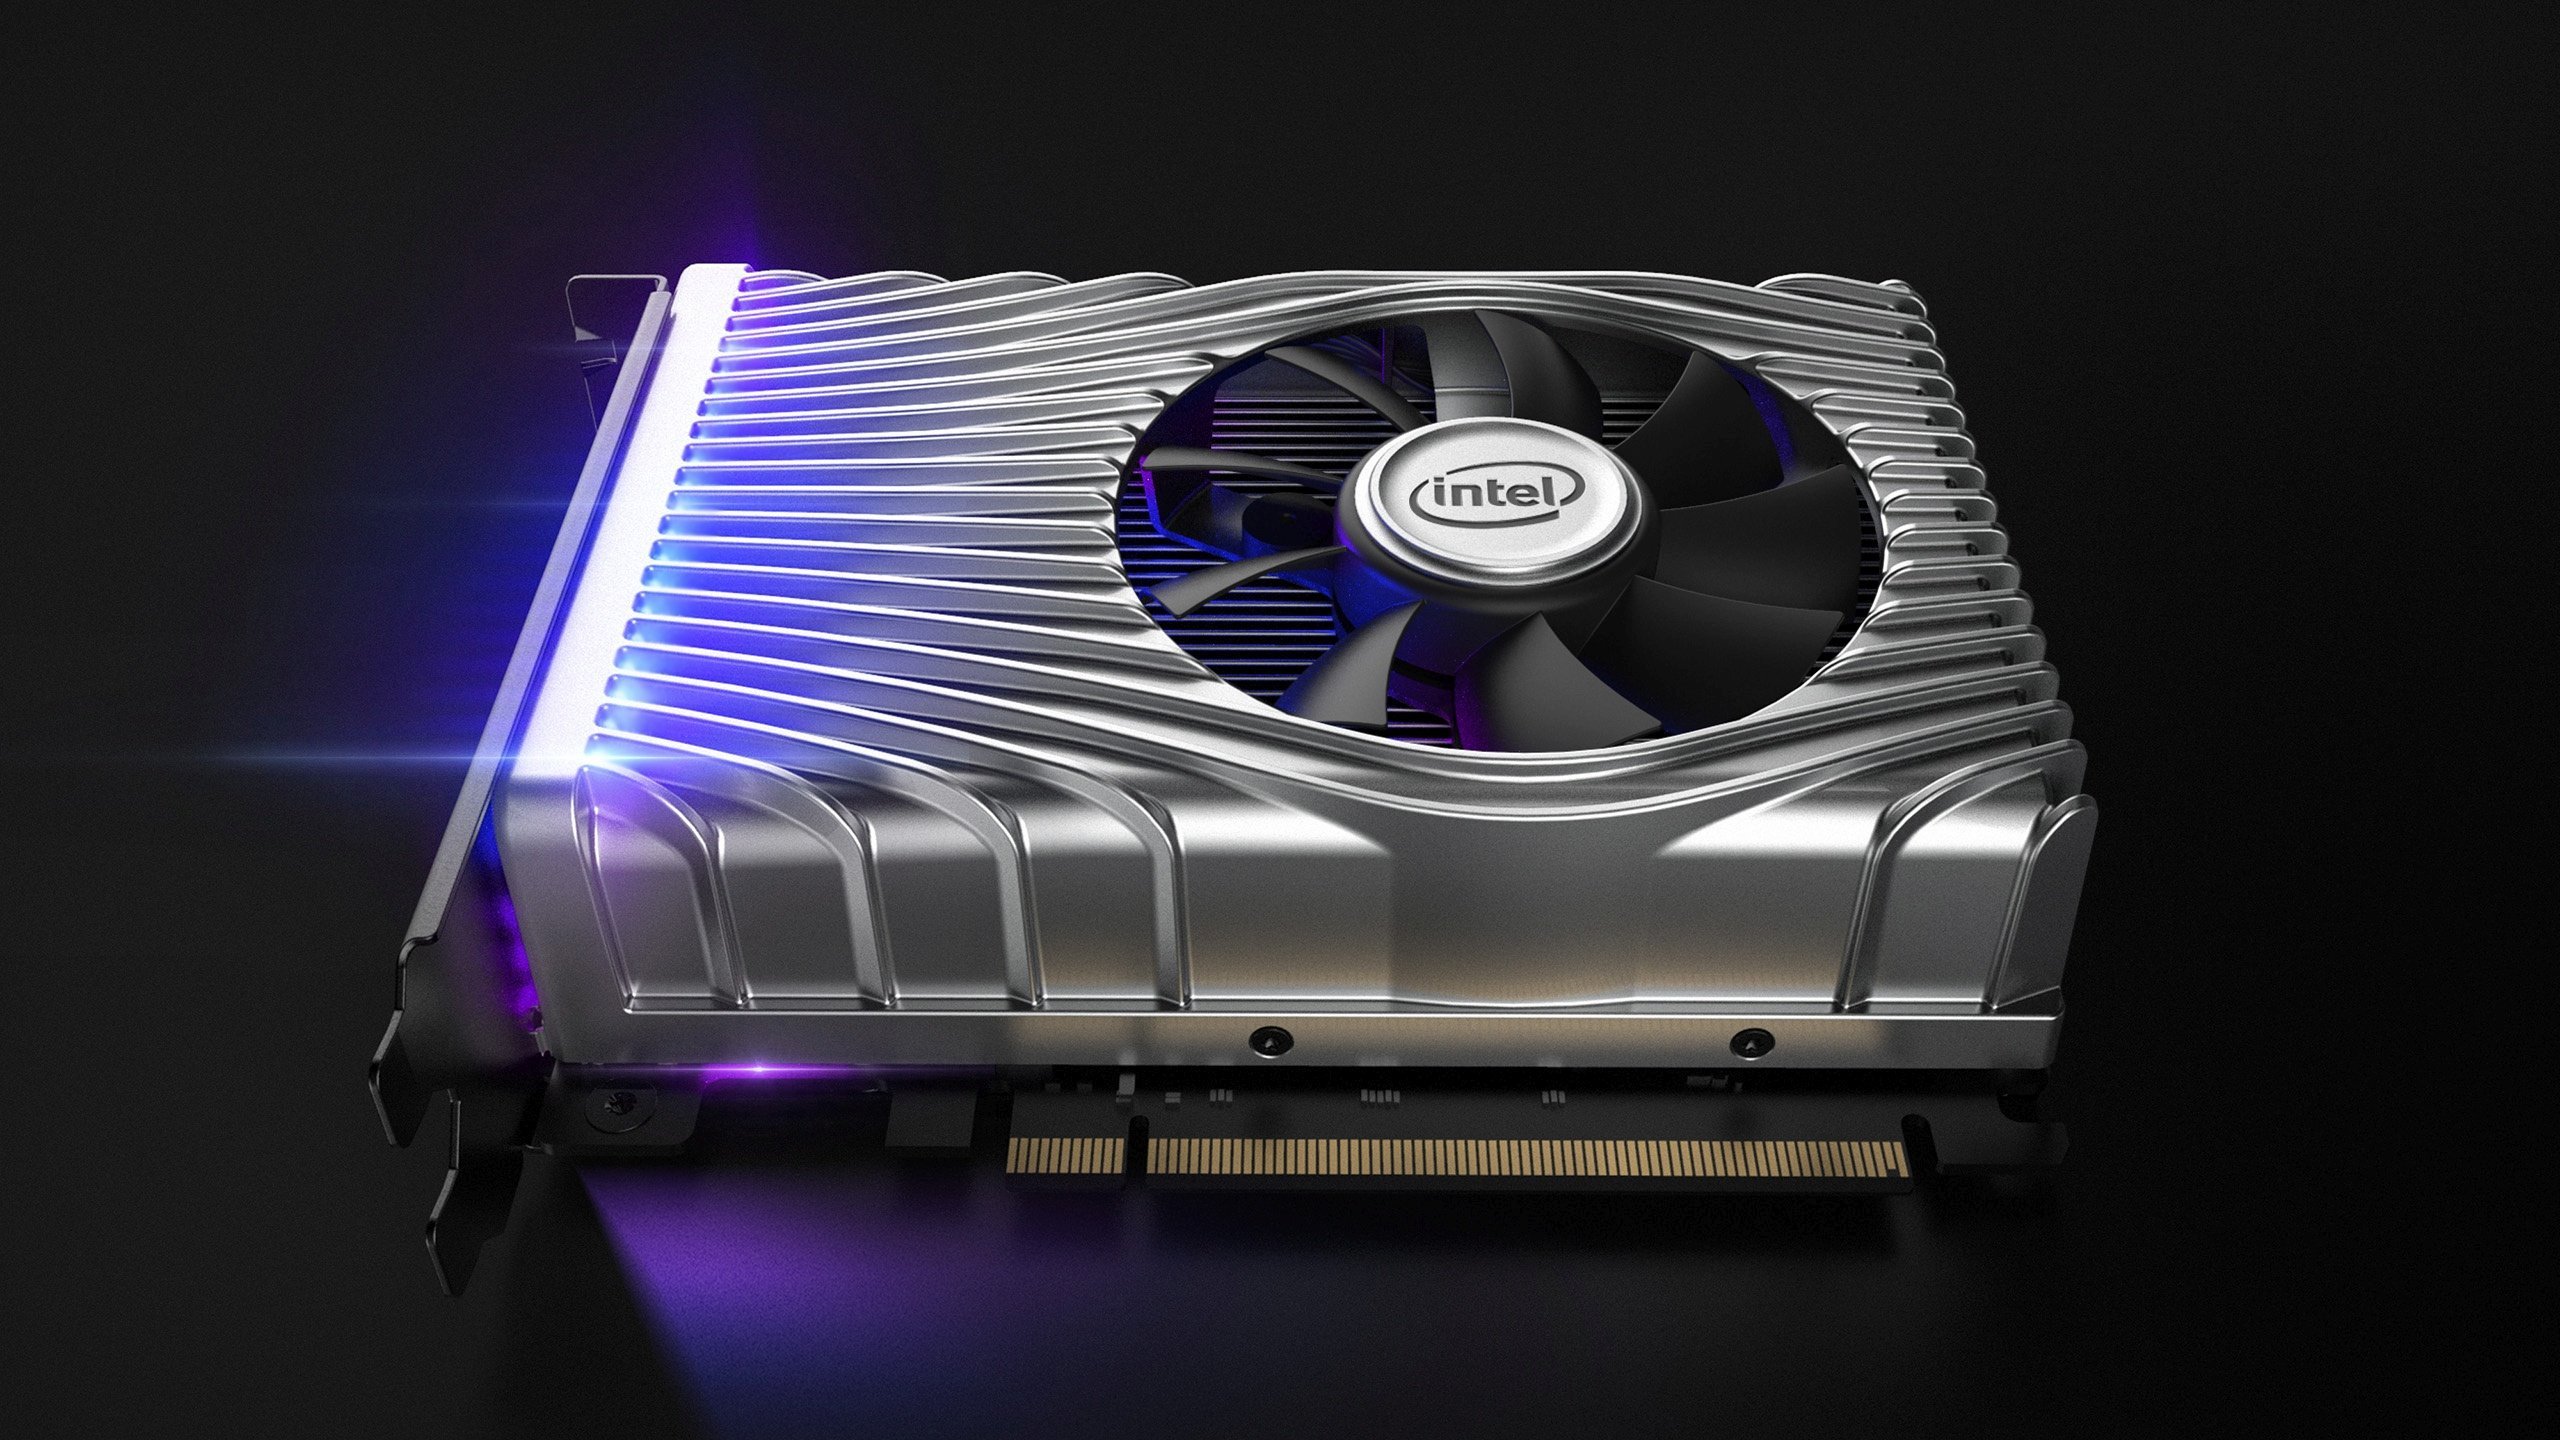 Intel's budget gaming graphics card will compete with the GeForce GTX 1650